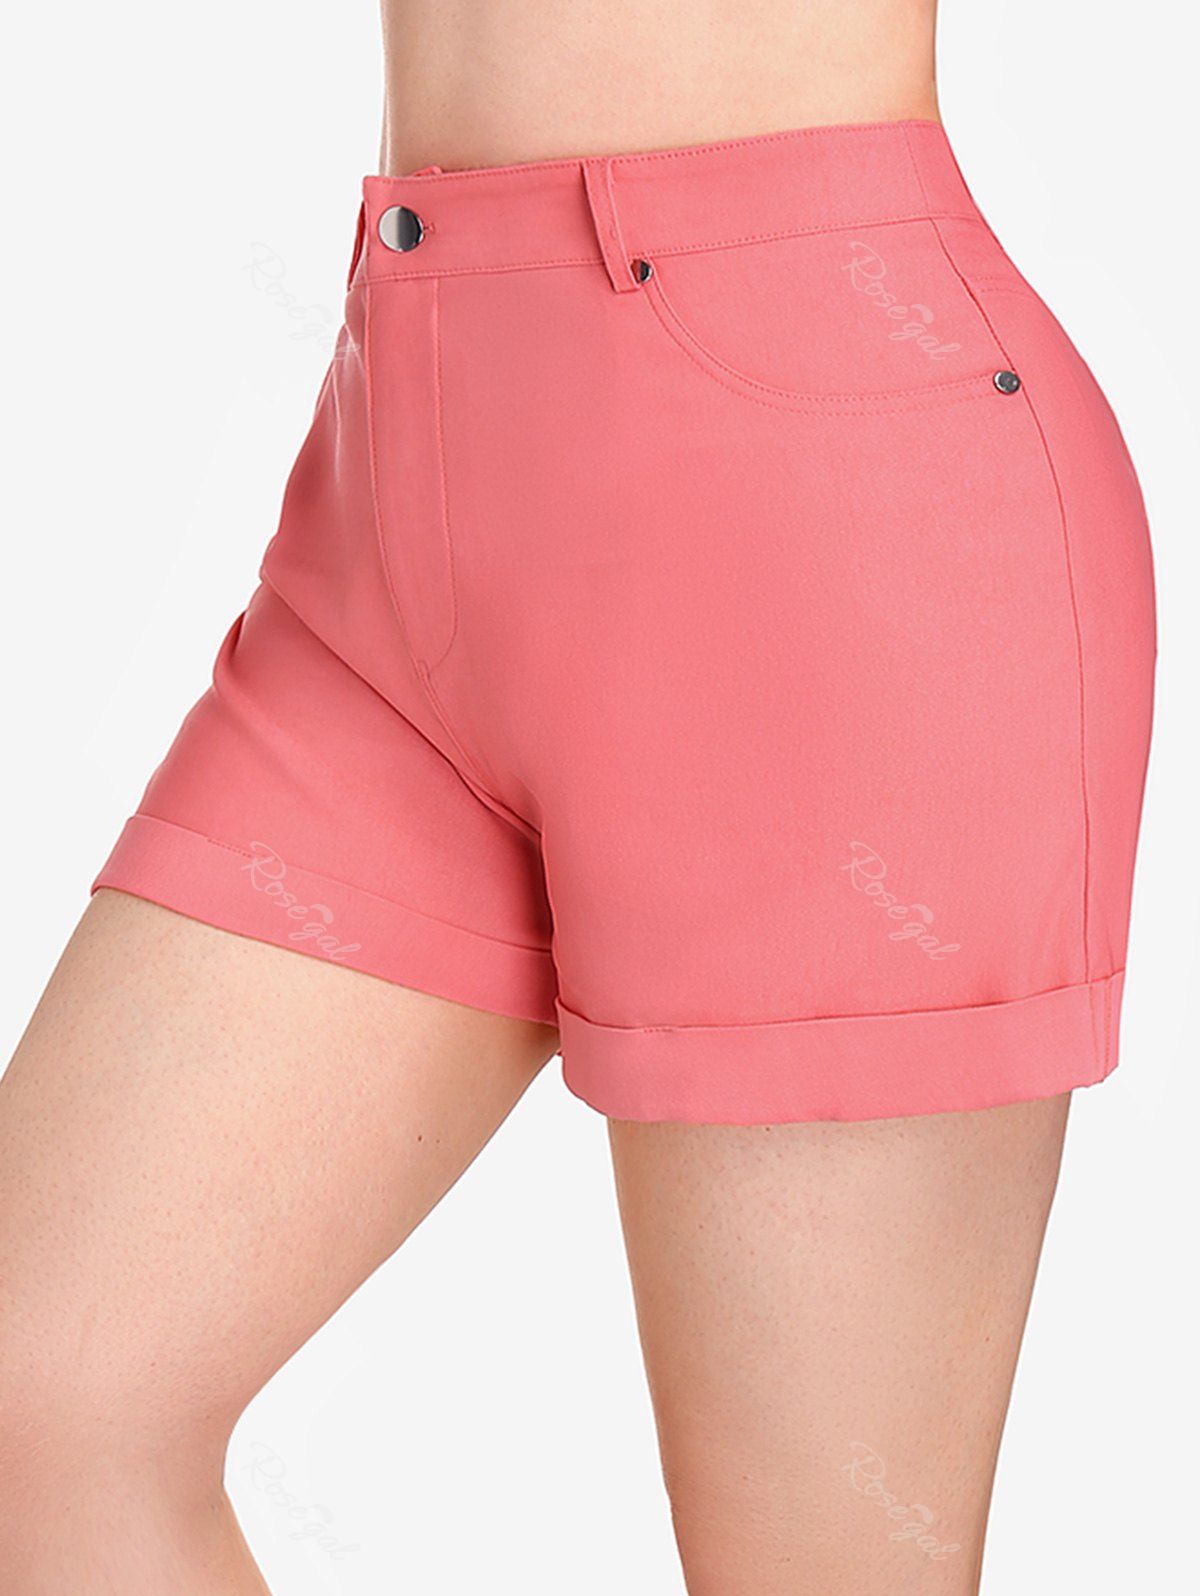 Cheap Plus Size Cuffed Colored Shorts with Pockets  